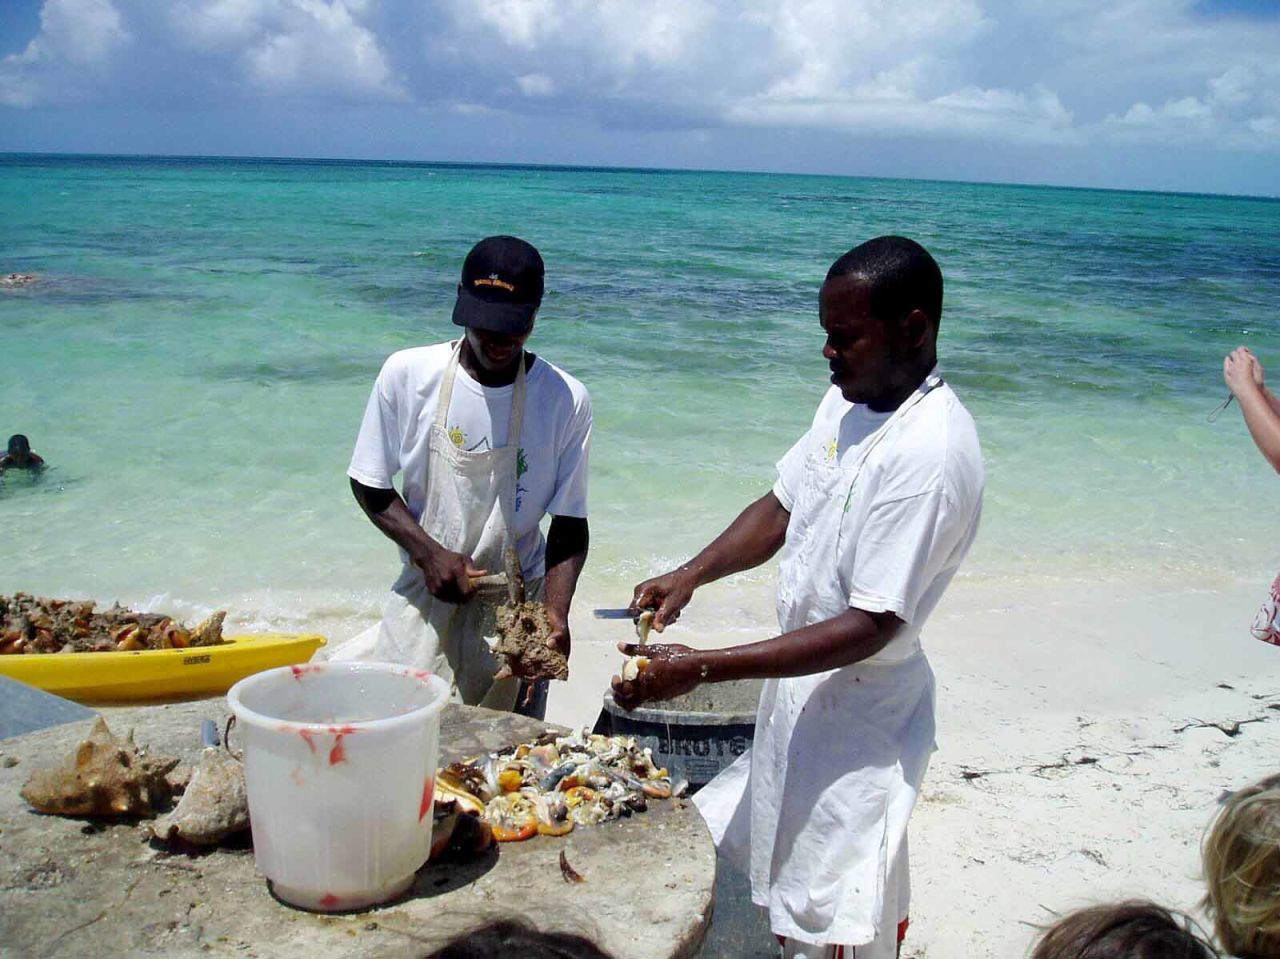 <a href="http://ireport.cnn.com/docs/DOC-1222445">Erin Carlson</a> visited Turks and Caicos in 2007 for her wedding. "One of our 'must dos' was a visit to 'da Conch Shack.' Here you can watch as they clean the conch right there on the beach, which you can then order in a dish at this little seaside bistro shack," wrote Carlson.